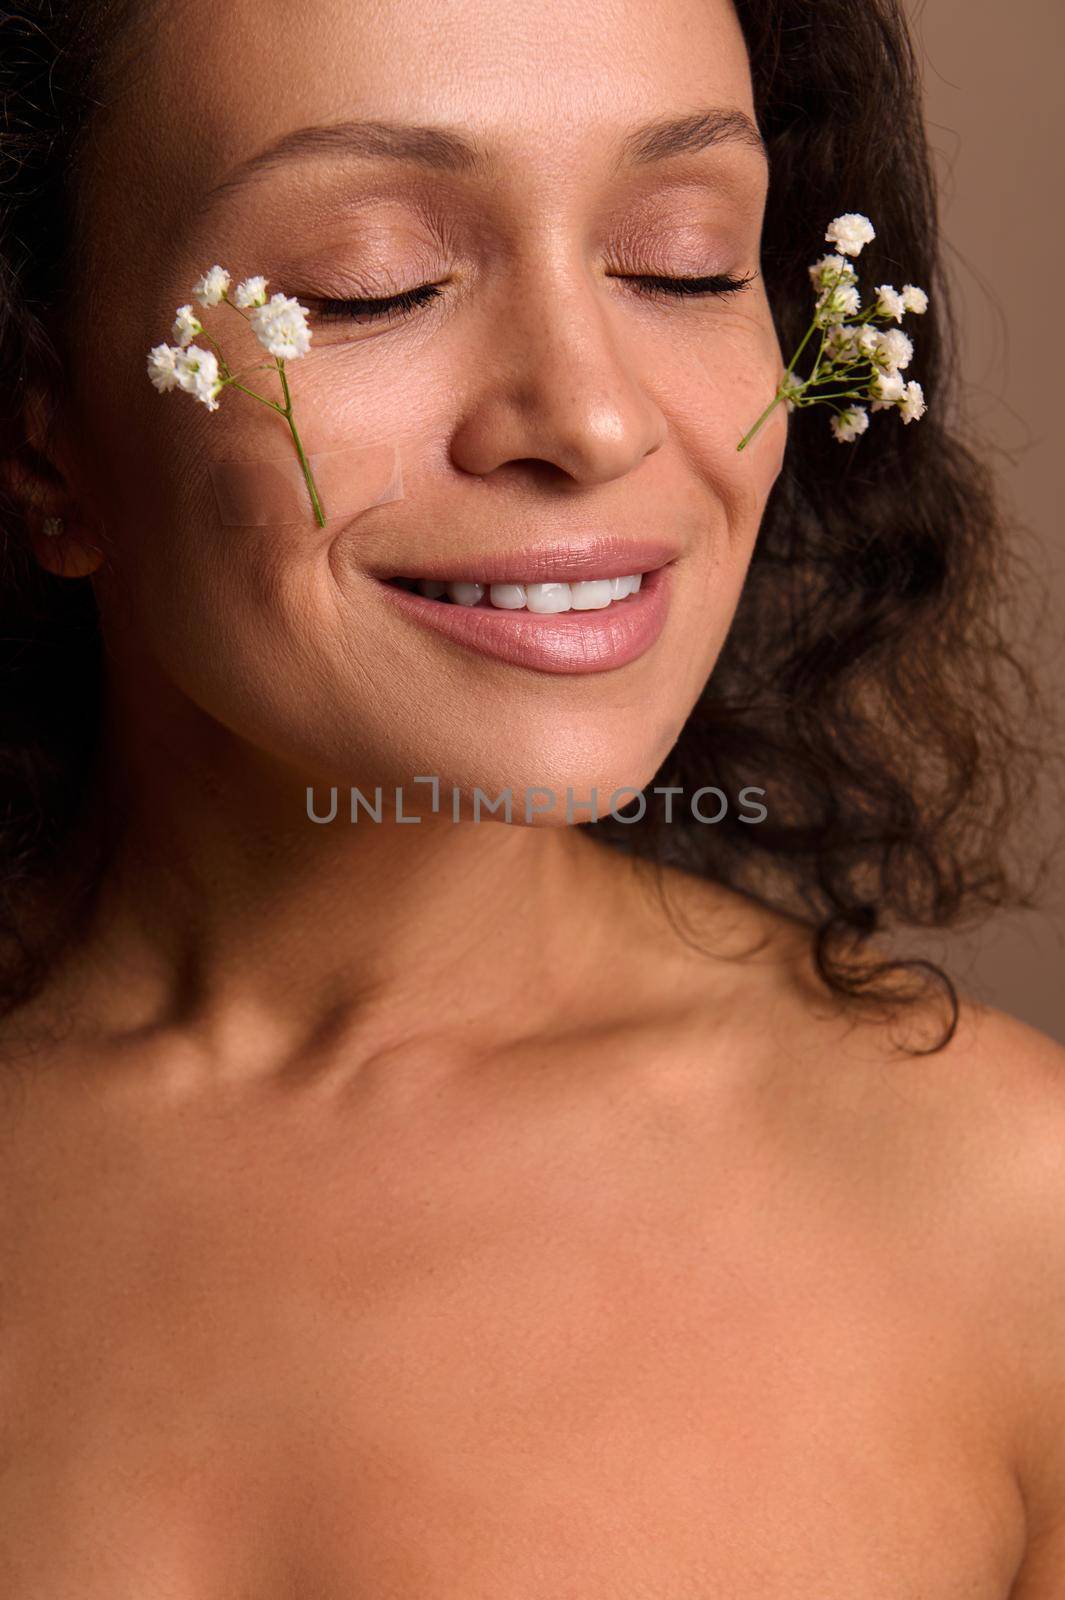 Serene delighted pretty natural beauty young woman with closed eyes and beautiful toothy smile posing with Gypsophila sprigs on her face. Skin care and body positivity concept. Cosmetology dermatology by artgf